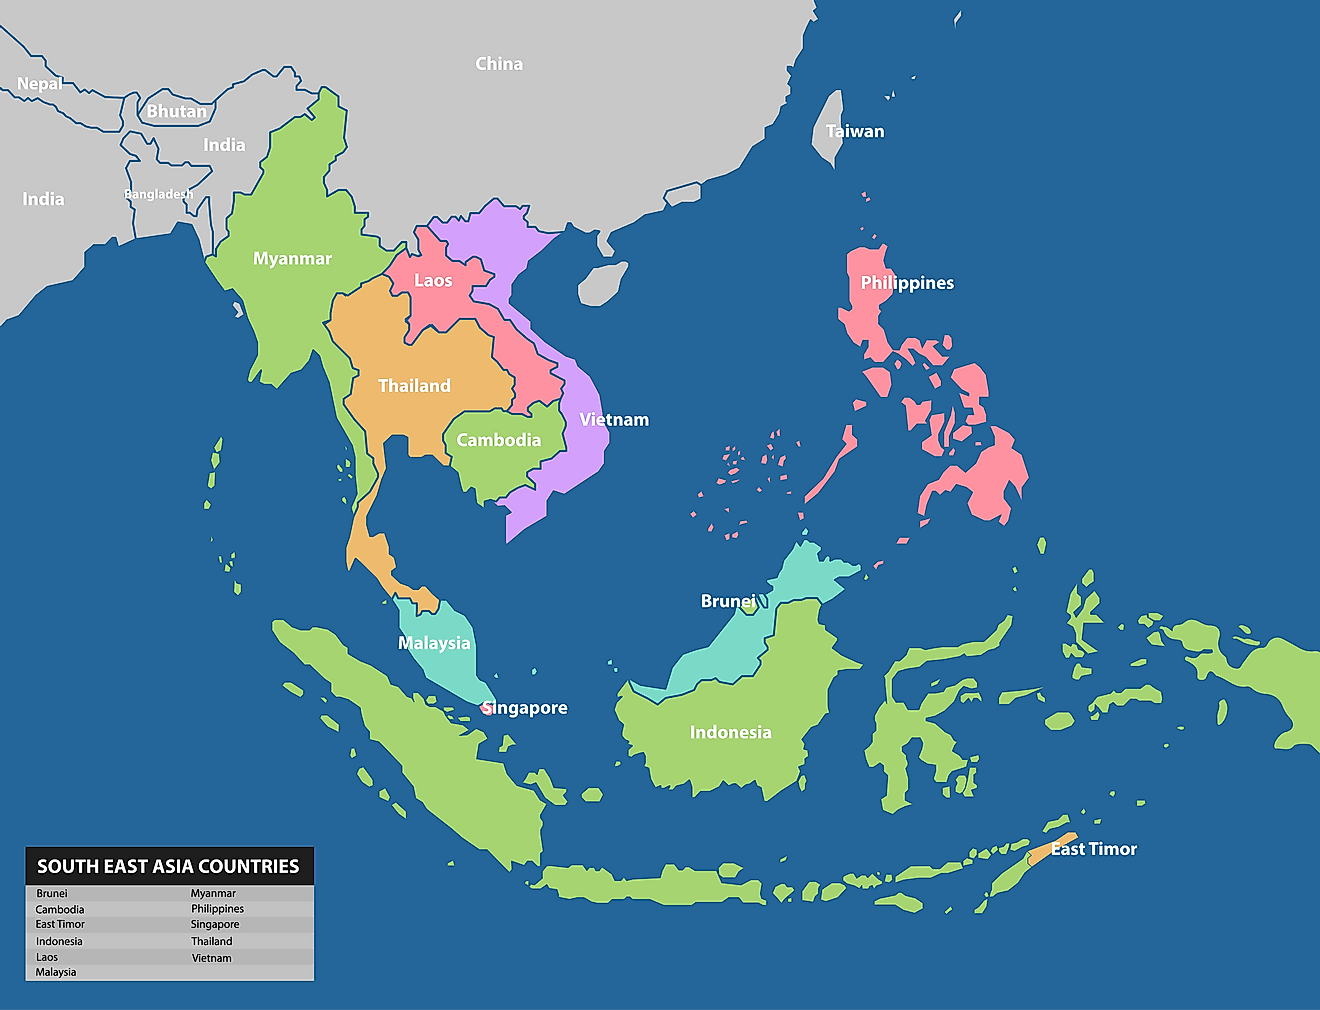 Southeast Asian Countries